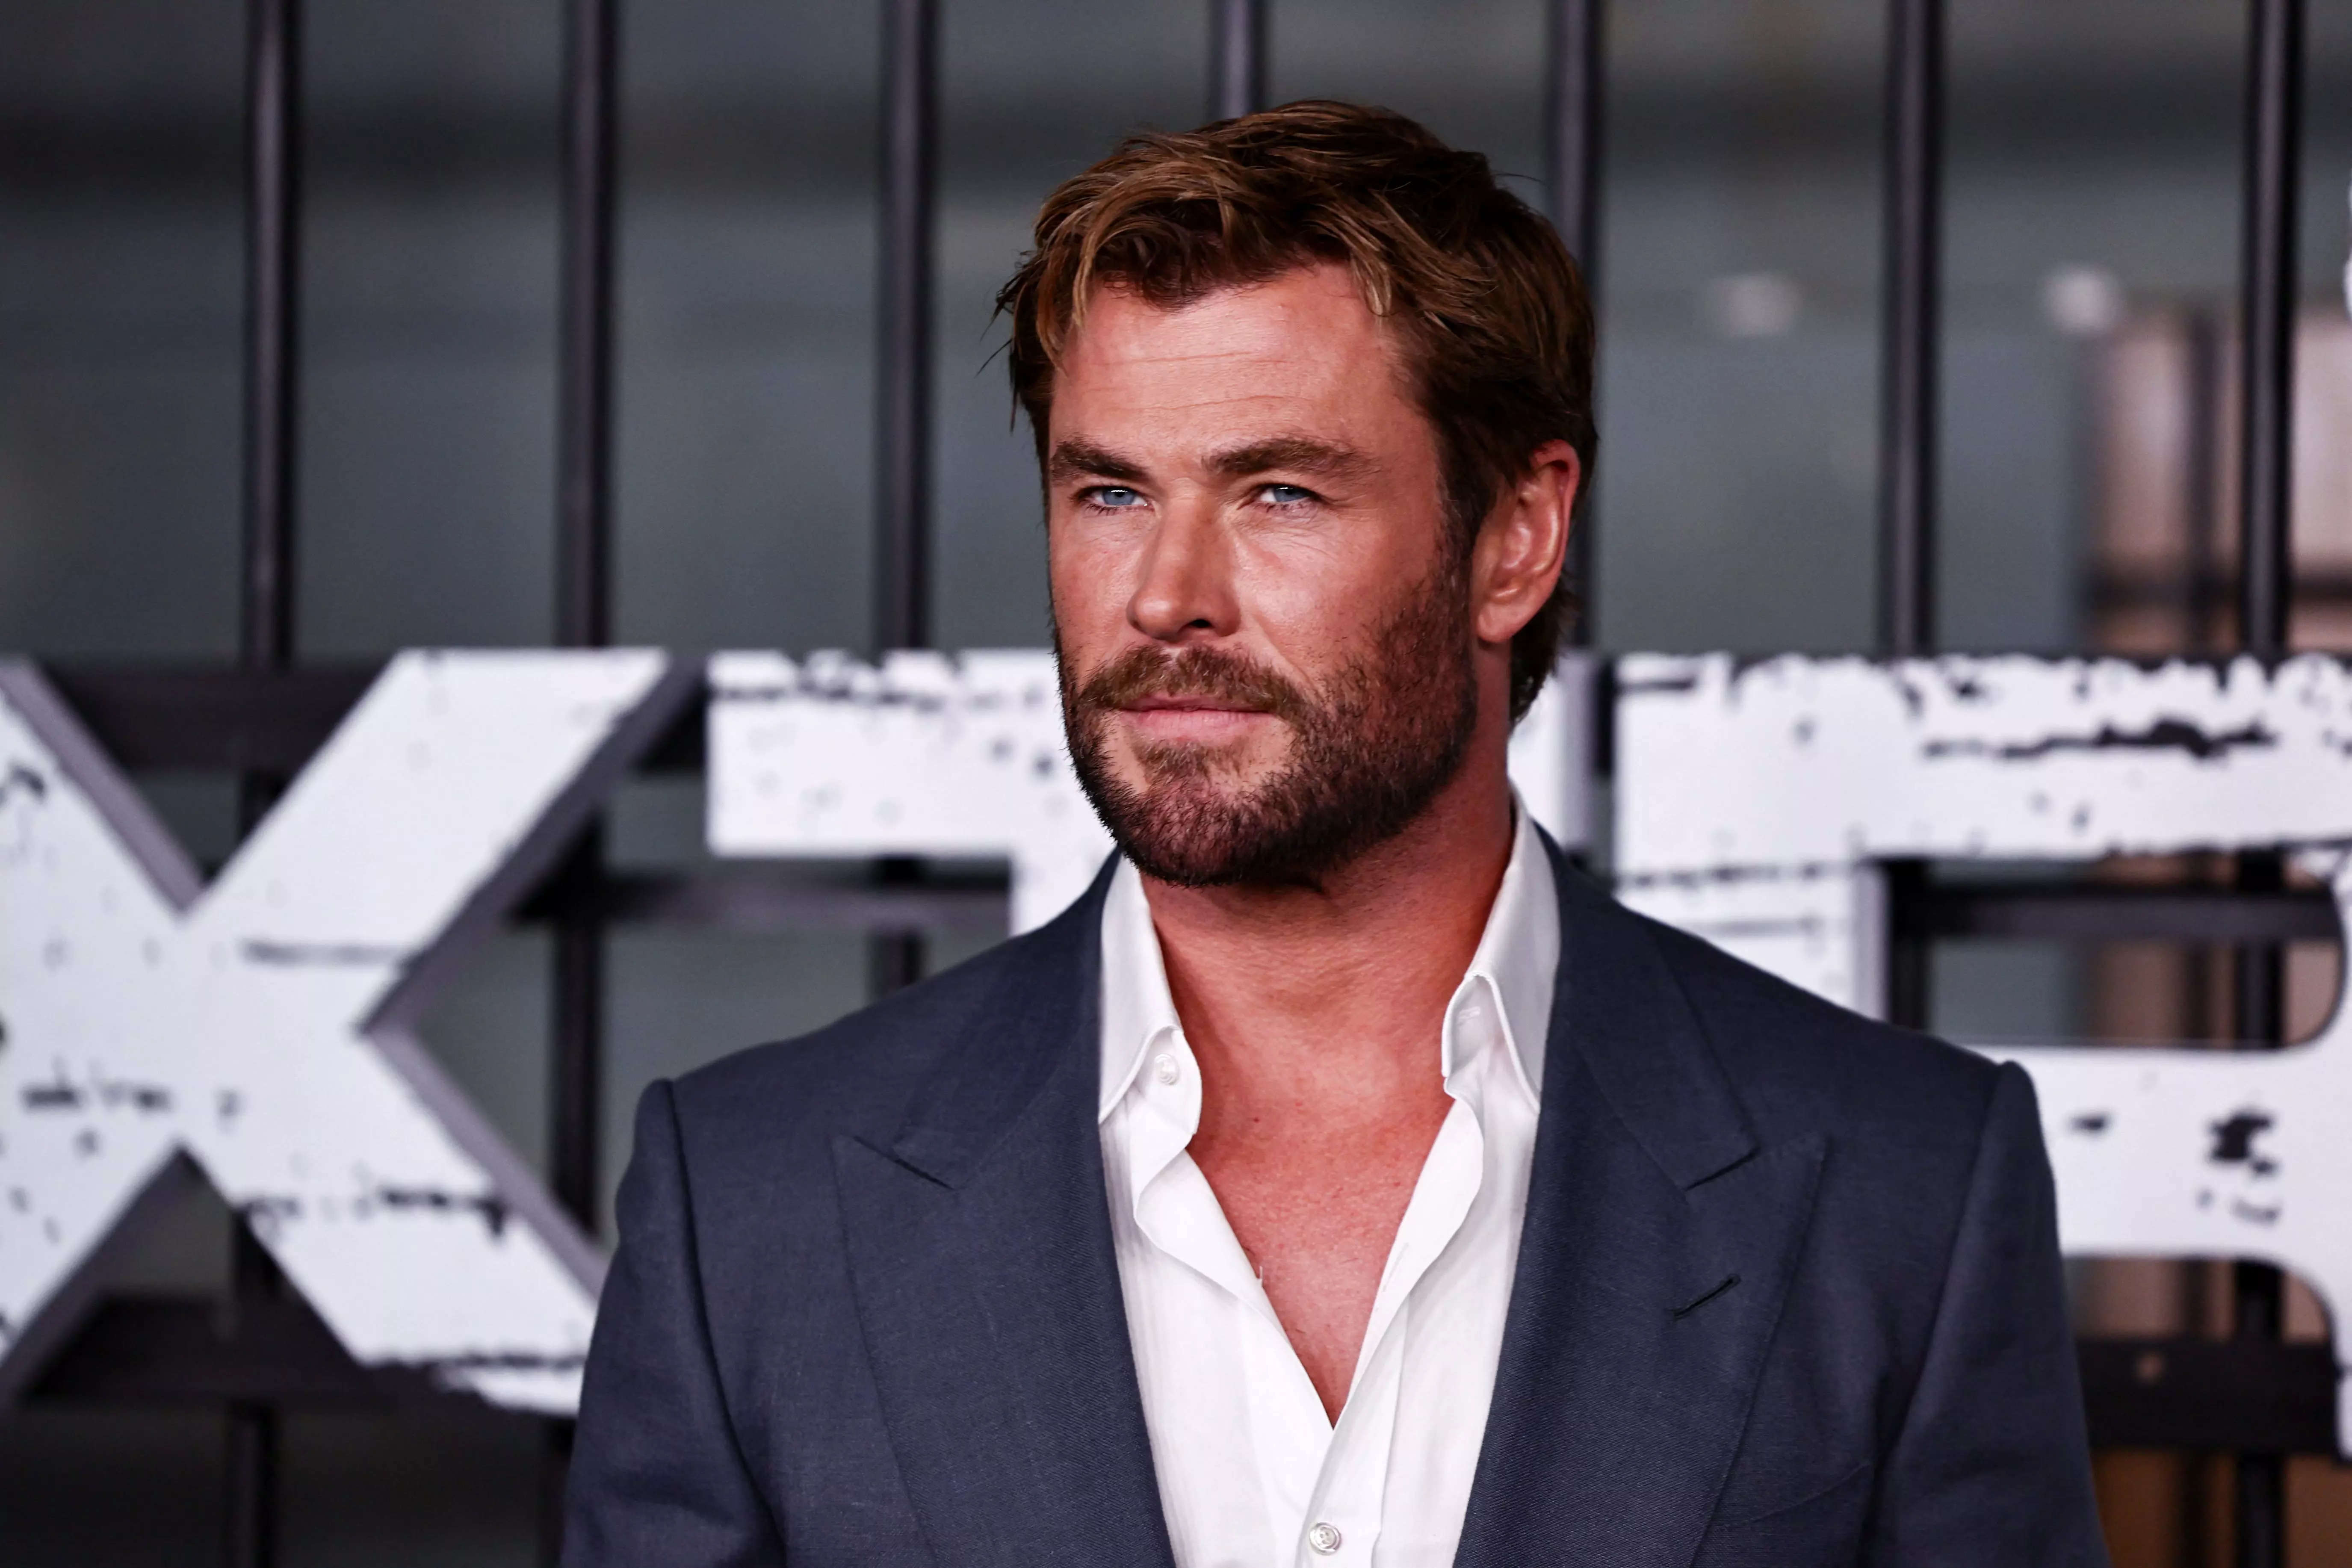 At 40, Chris Hemsworth has a new longevity workout routine — adding booty  bands and going easy on weight machines | Business Insider India